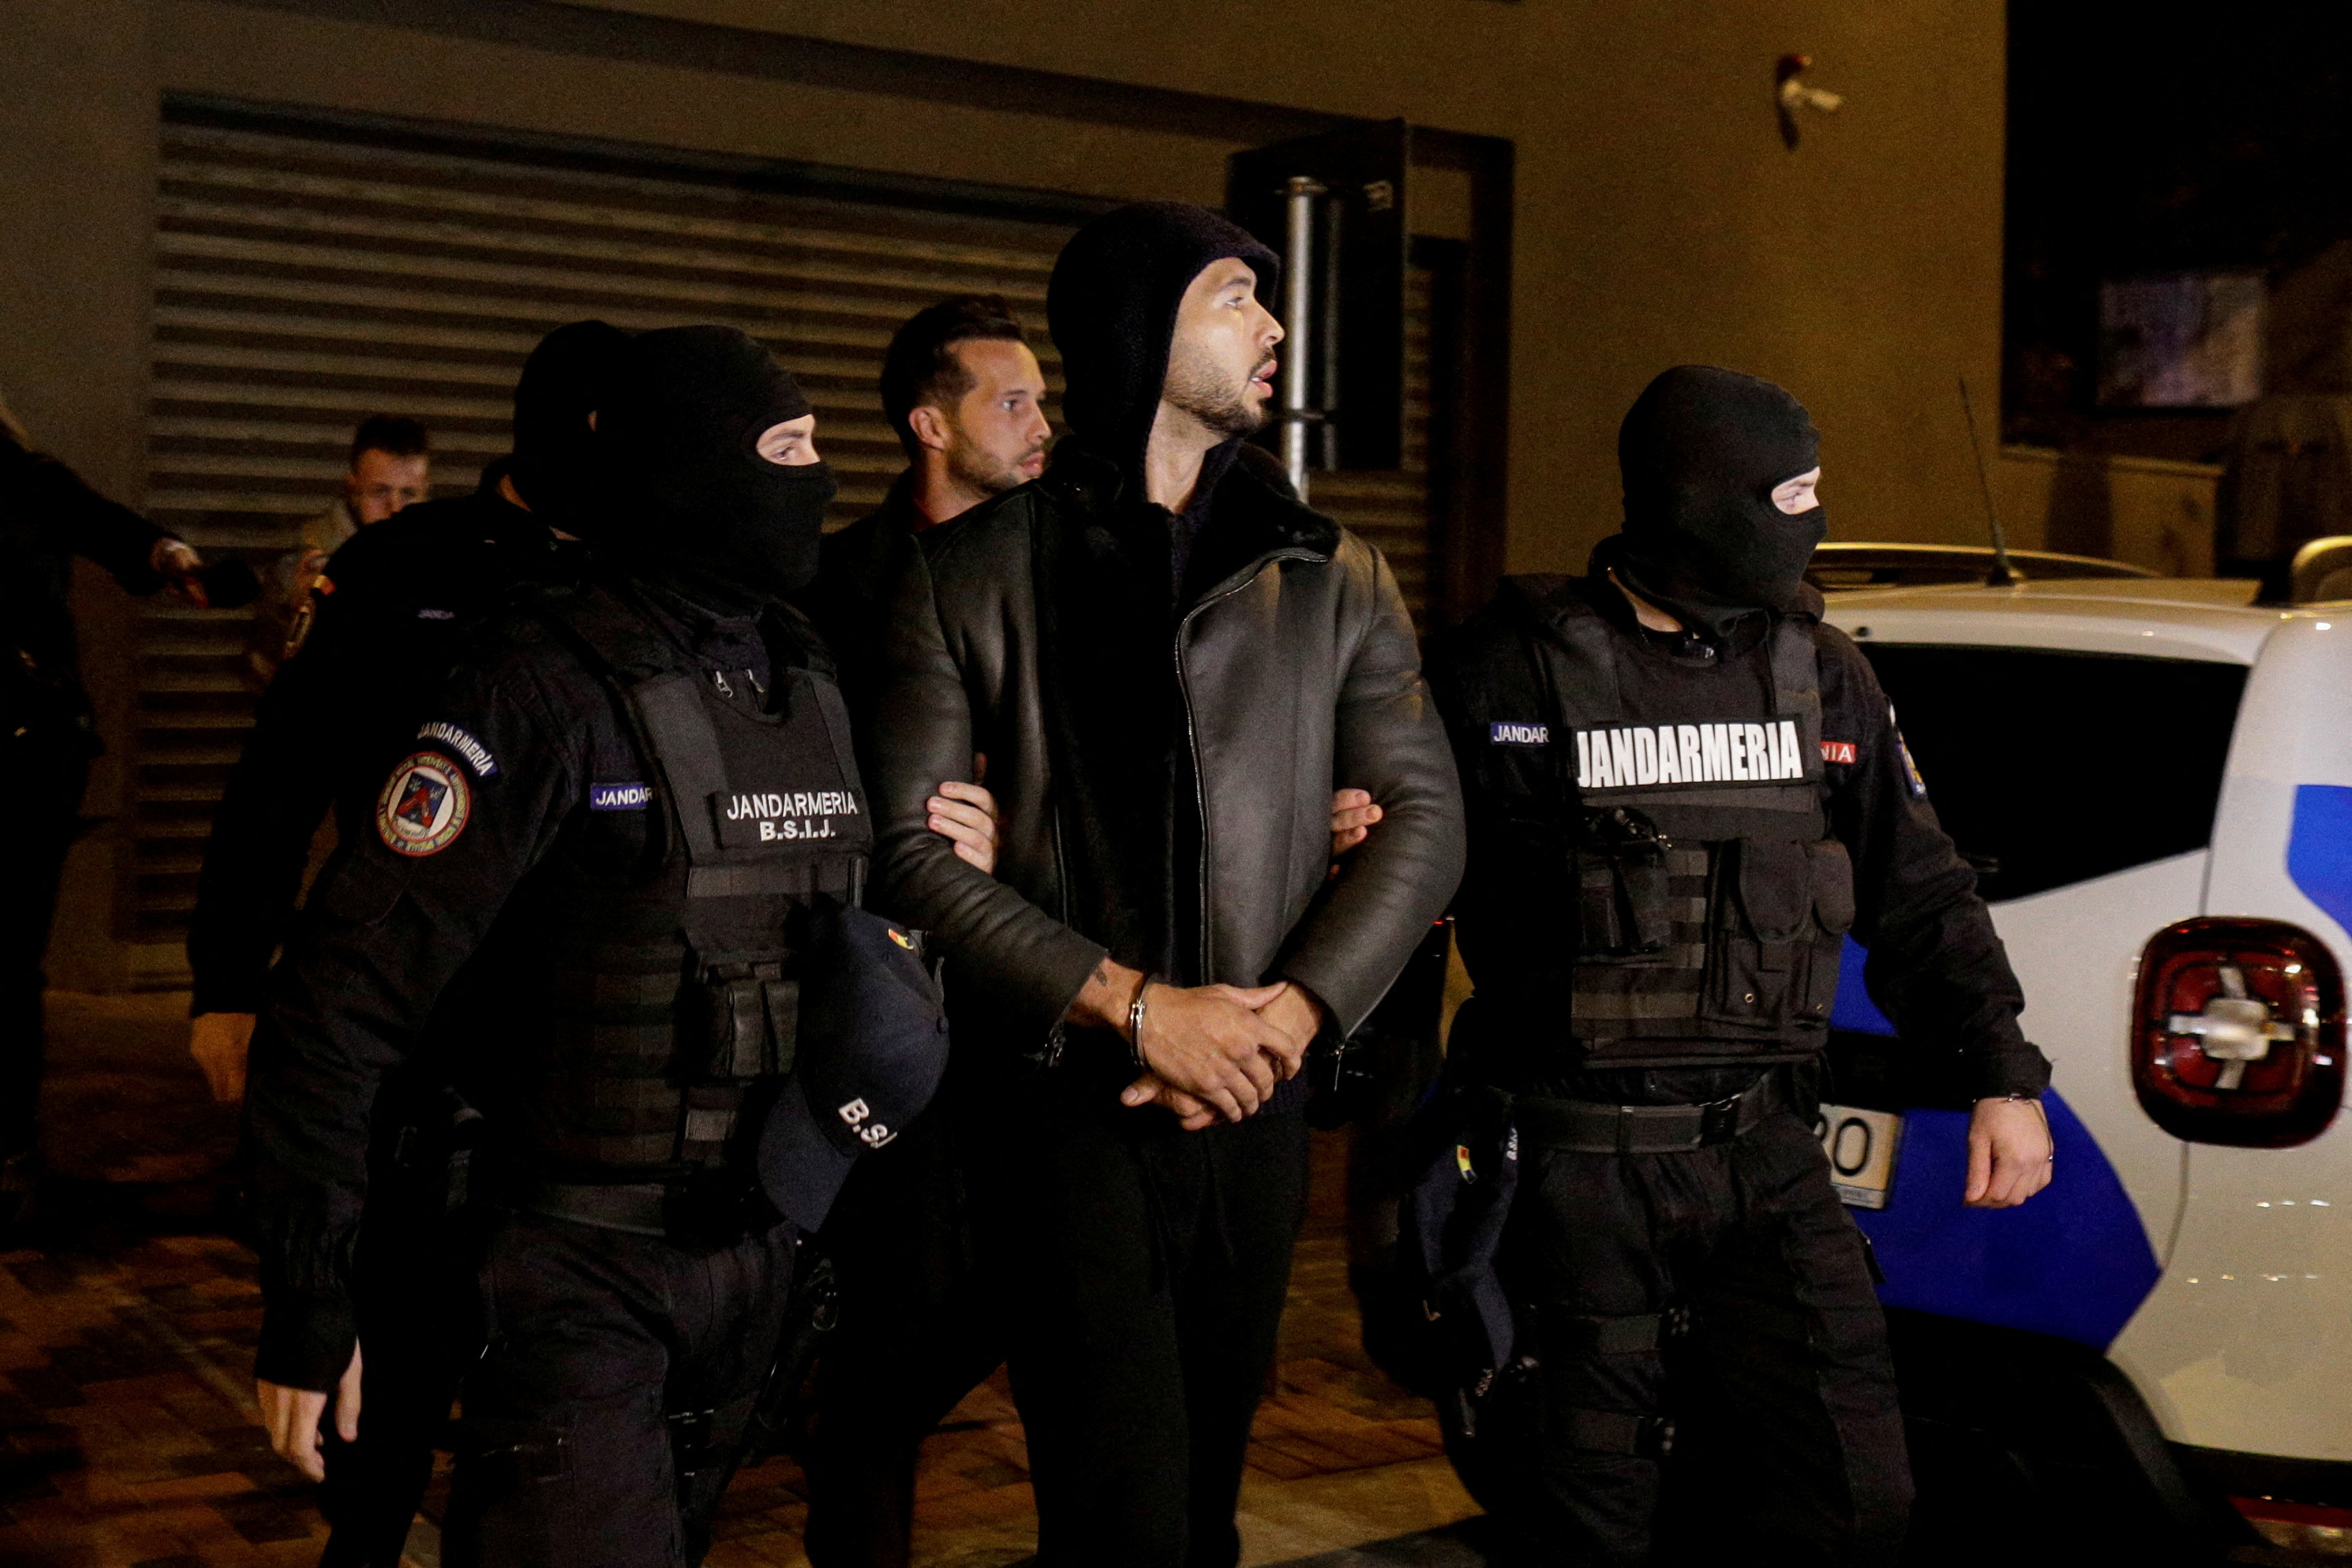 Andrew Tate and Tristan Tate being escorted by law enforcement officials outside the DIICOT headquarters in Bucharest, Romania, after a 24-hour detention